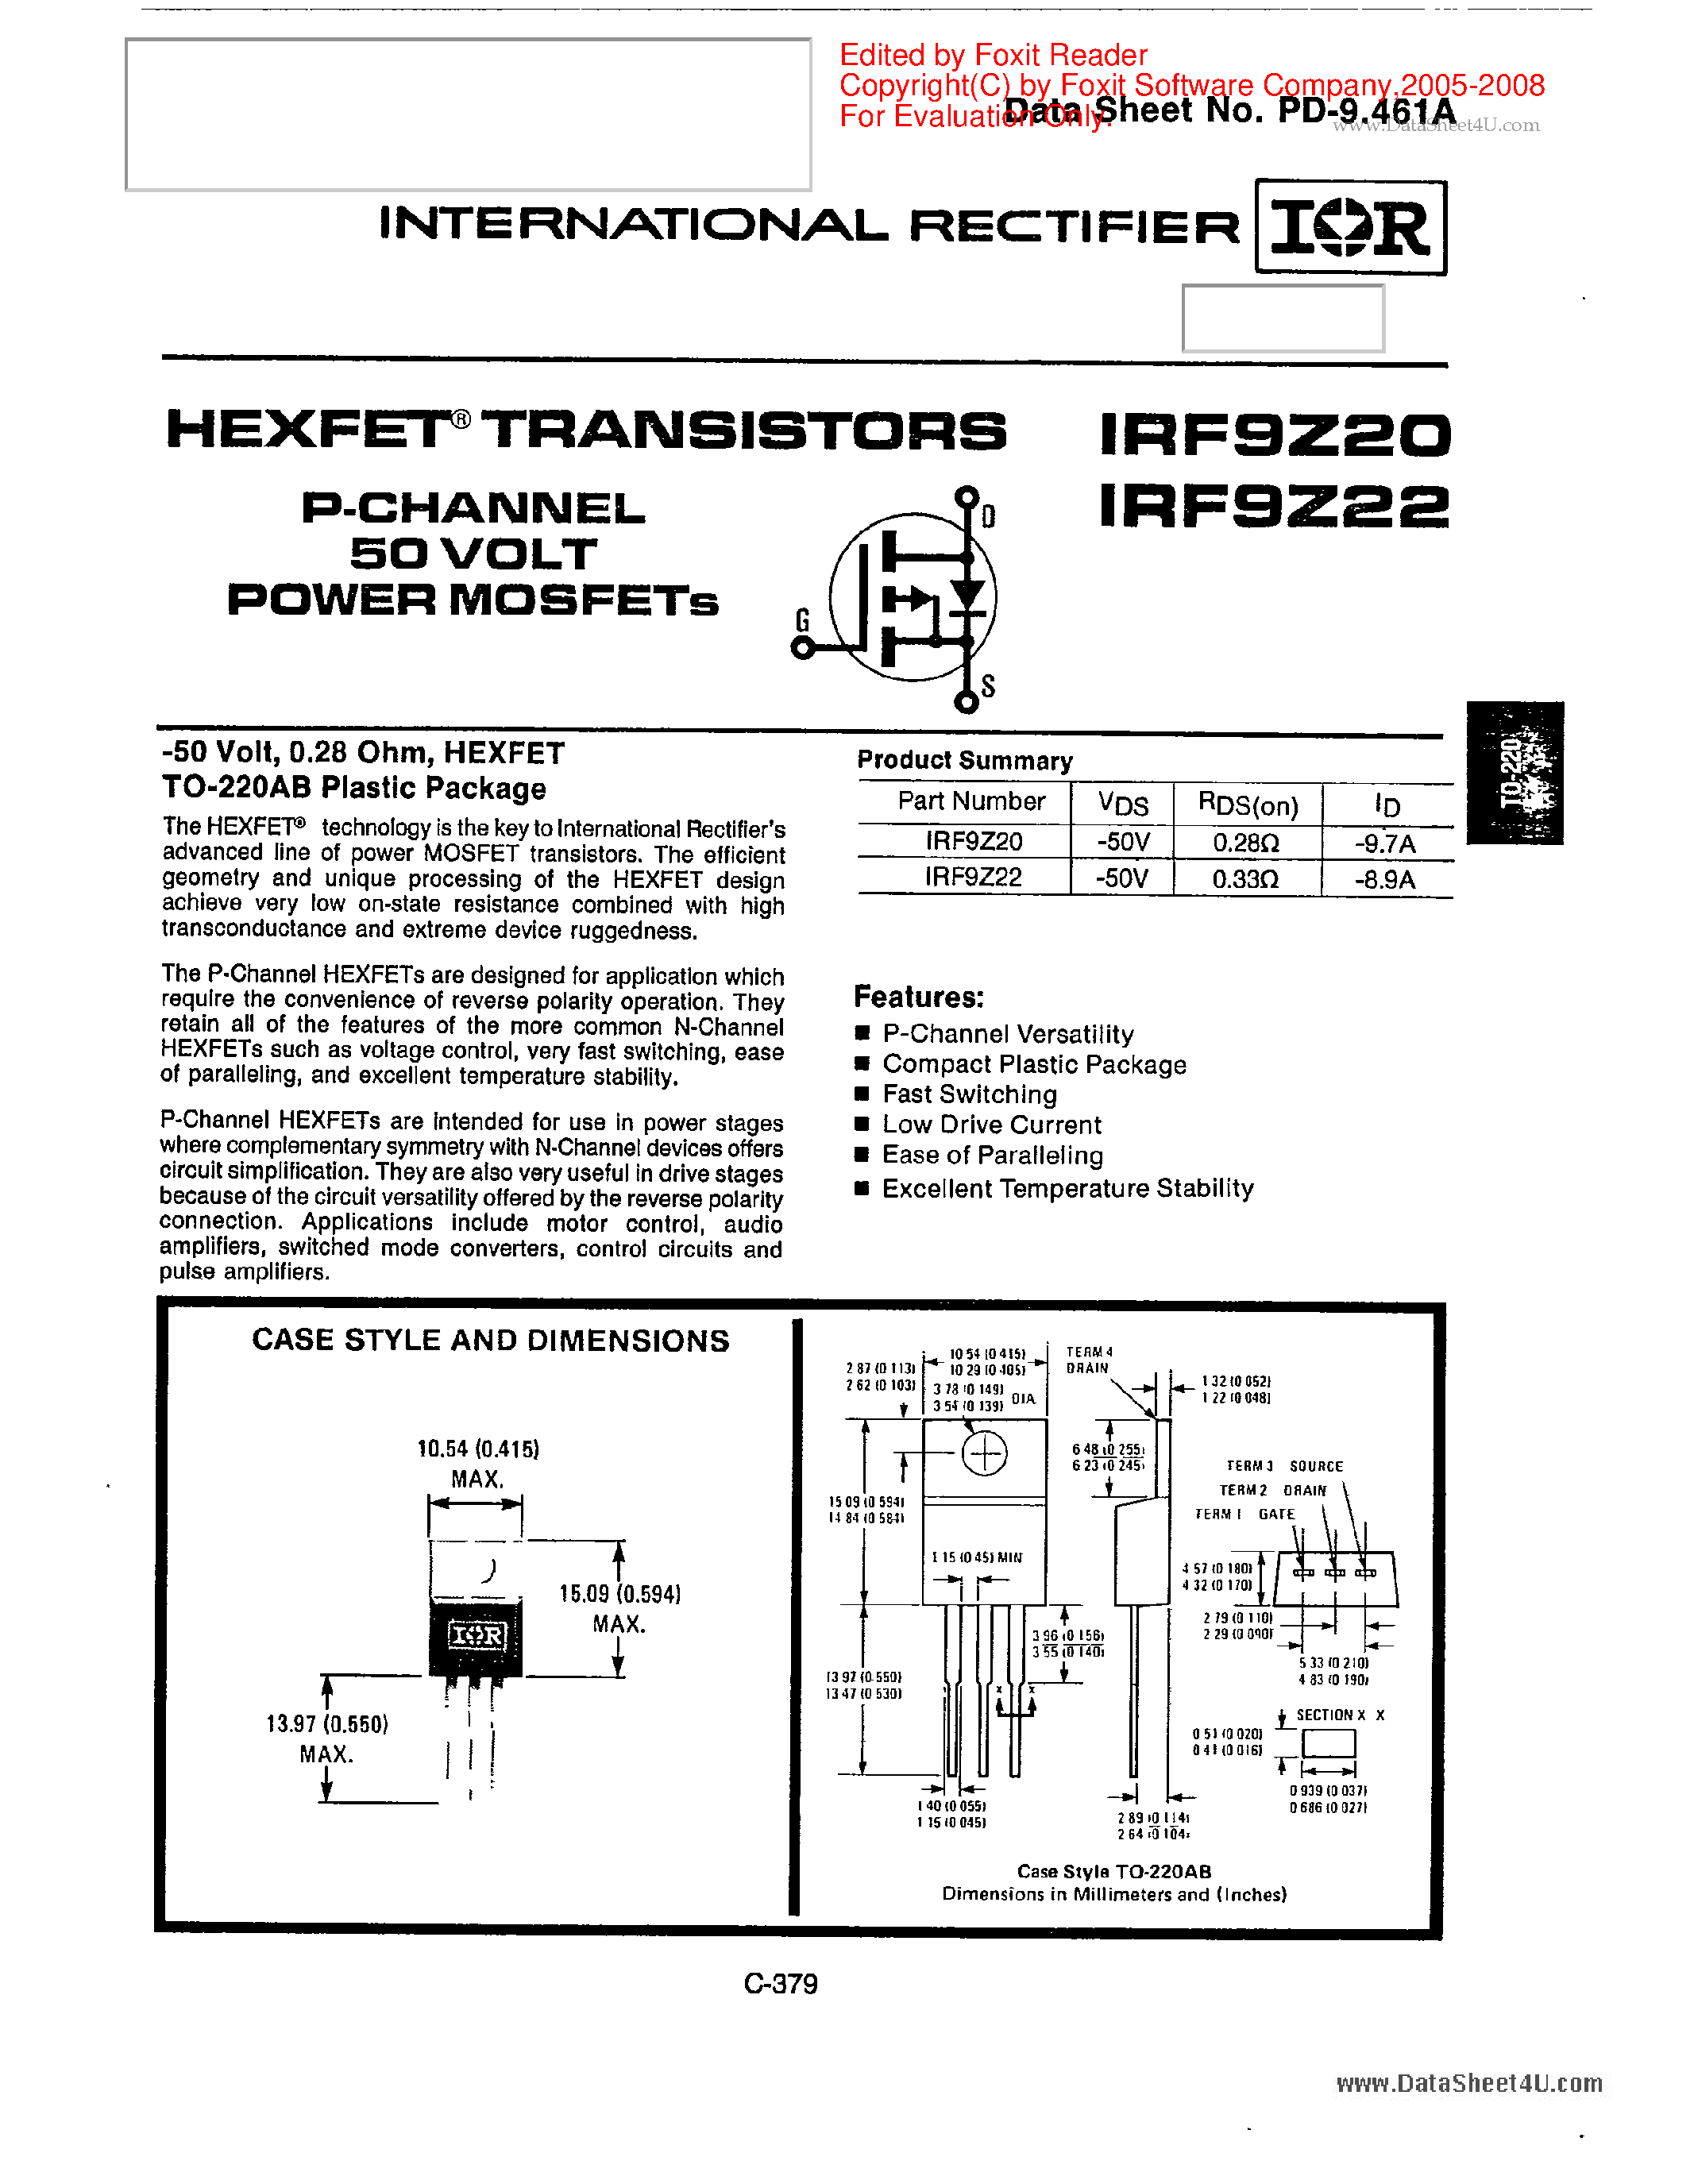 Даташит IRF9Z20 - (IRF9Z20 / IRF9Z22) P-CHANNEL 50 VOLT POWER MOSFETs страница 1